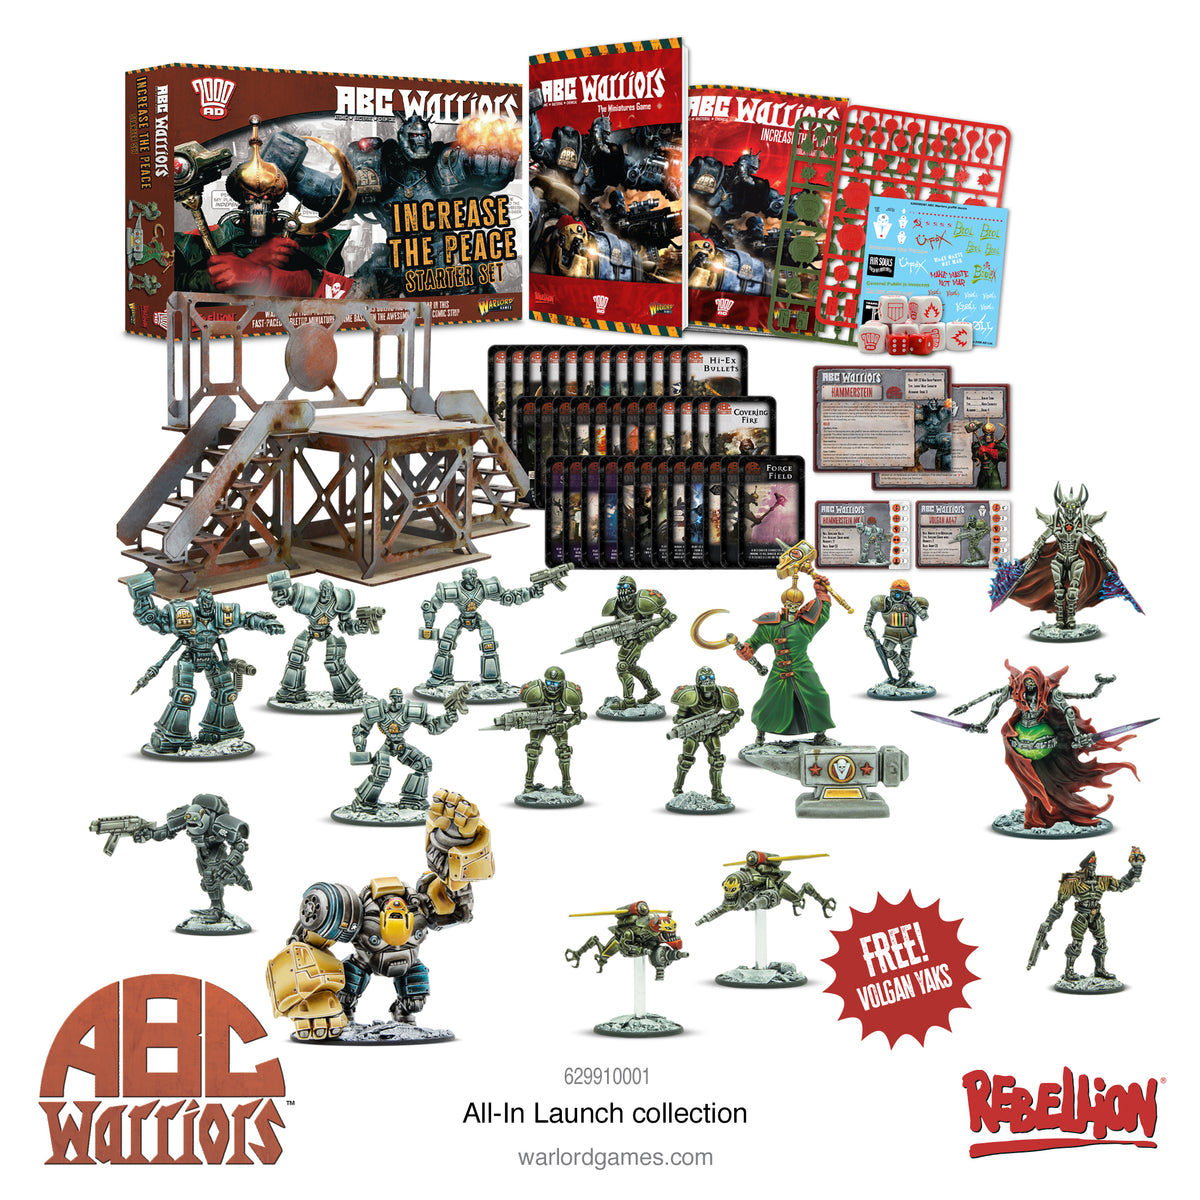 ABC Warriors: All In Launch Collection